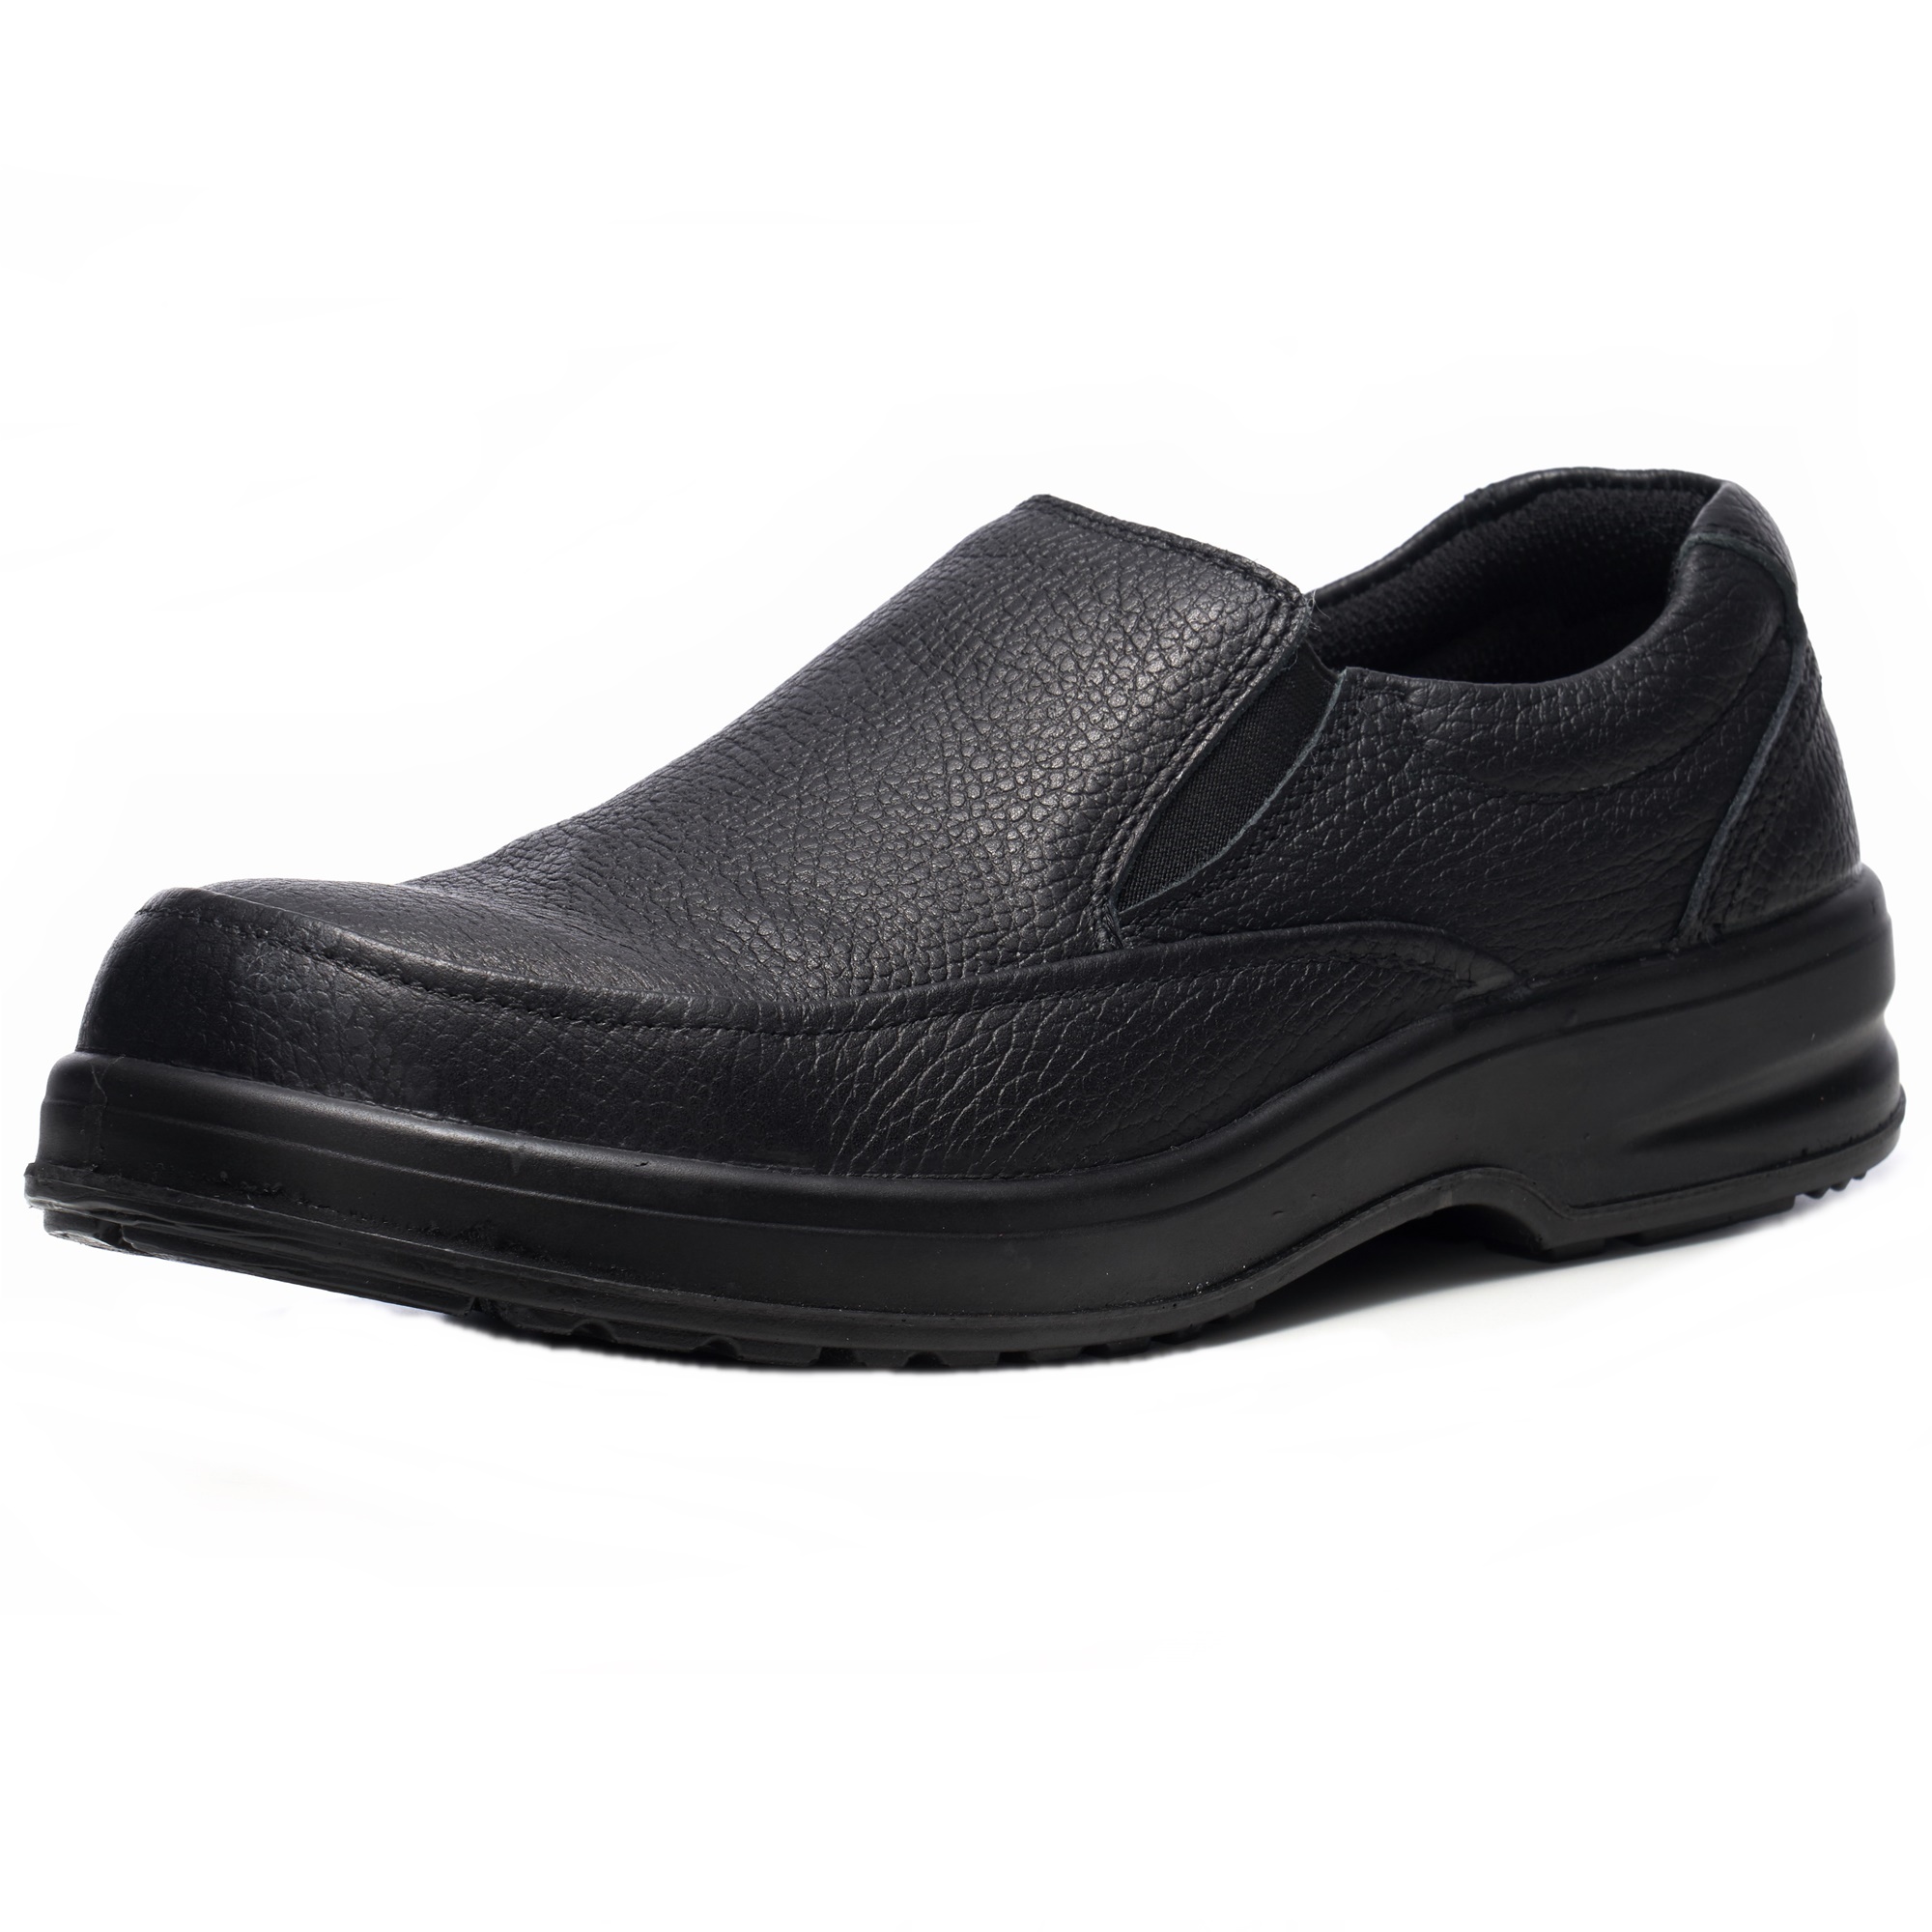 Alpine Swiss Arbete Mens Work Shoes Slip Resistant Real Leather Slip-On Loafers - Black - Size 9